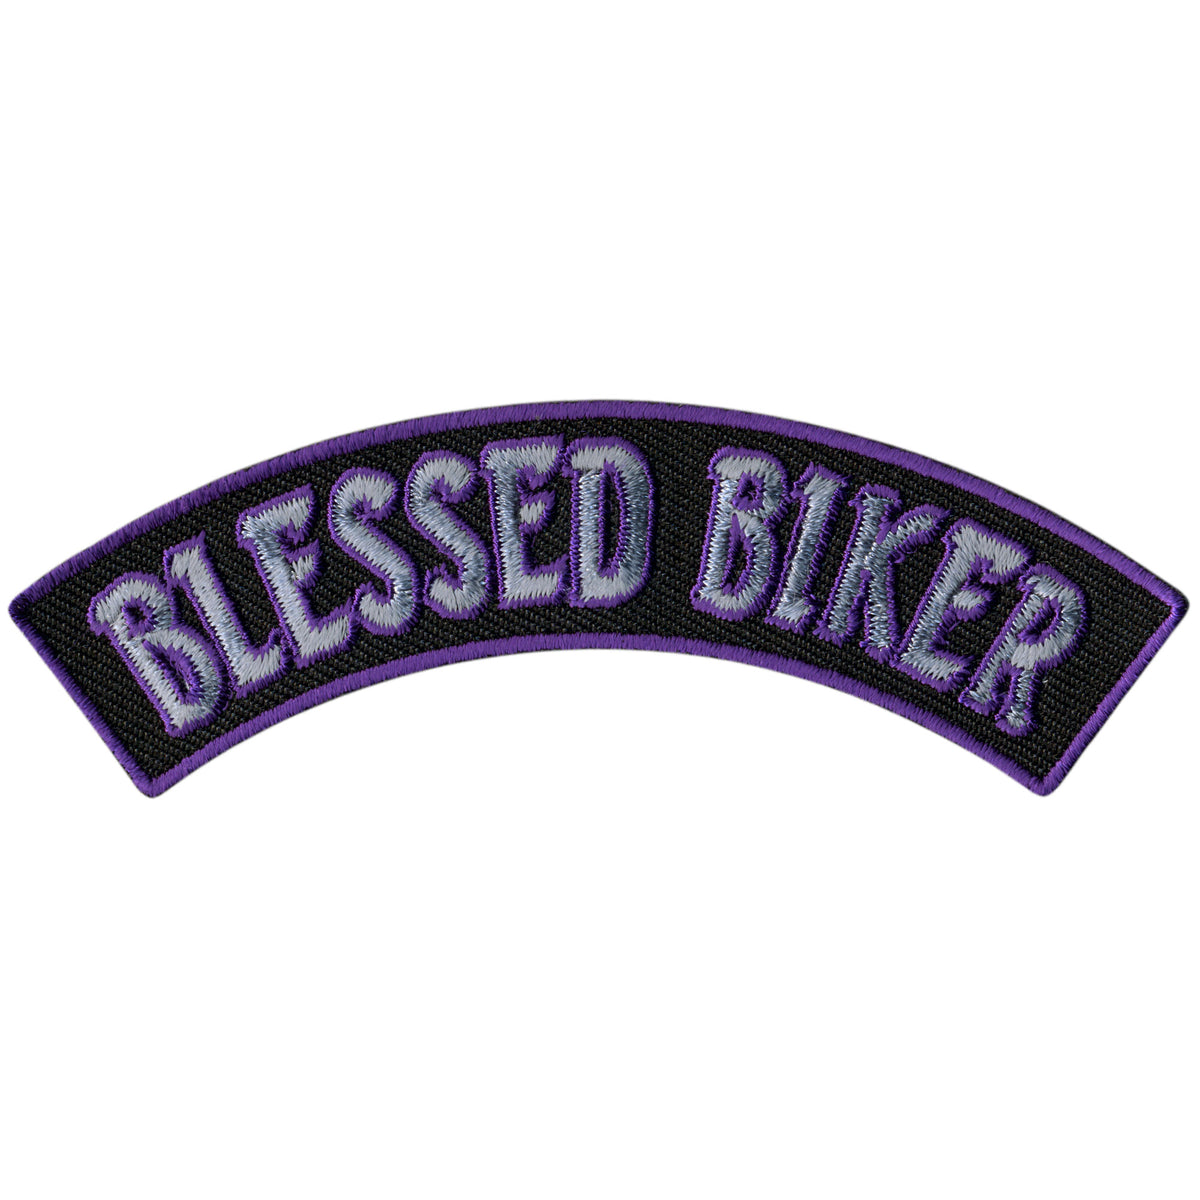 Hot Leathers Blessed Biker 4” X 1” Top Rocker Patch